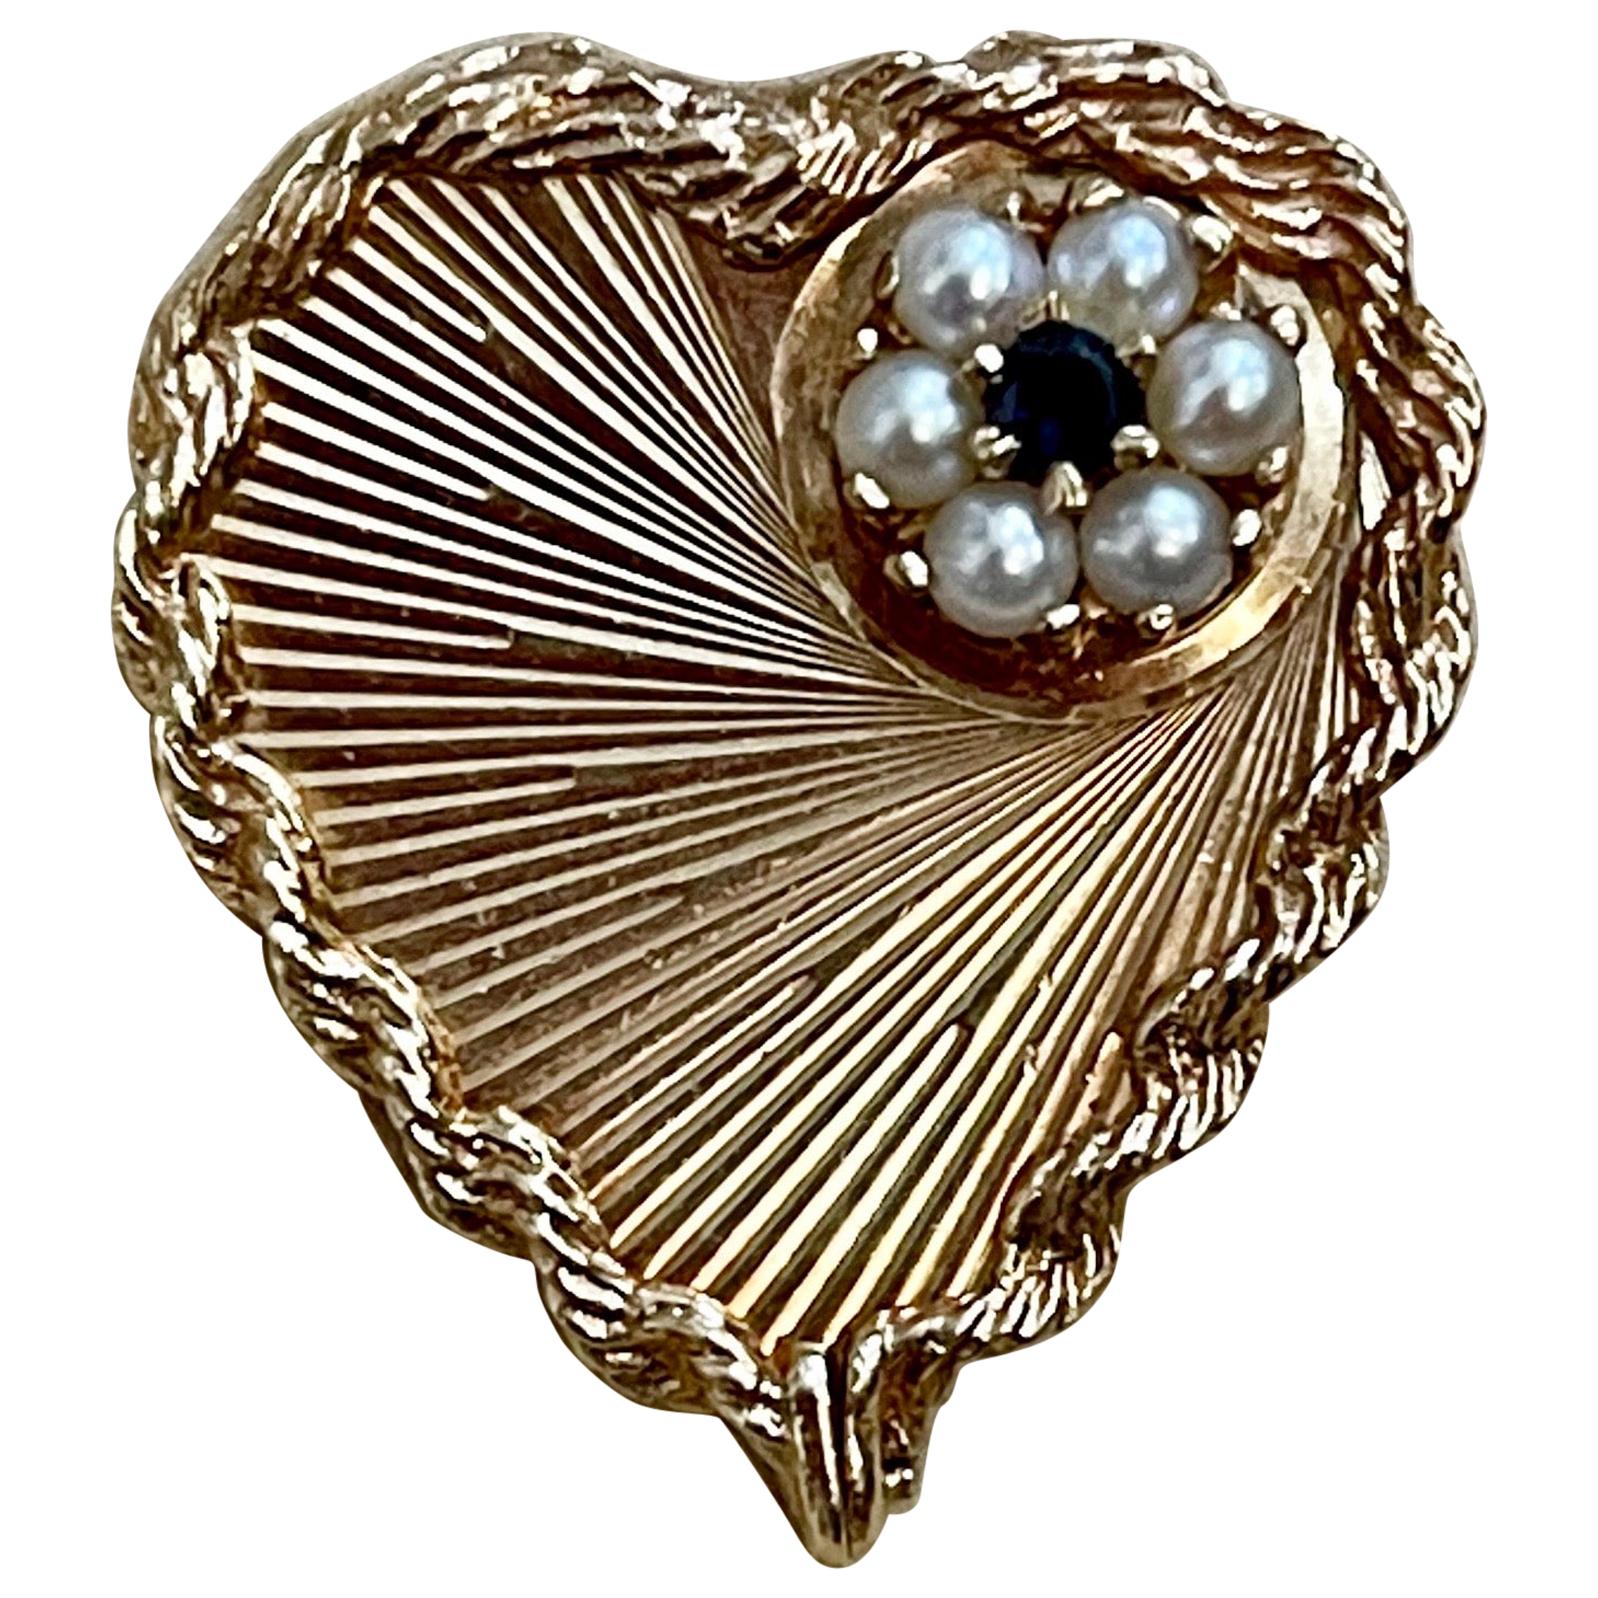 6 Pearl and Sapphire Heart Shaped 14 Karat Gold Pin or Broach Affordable, Estate